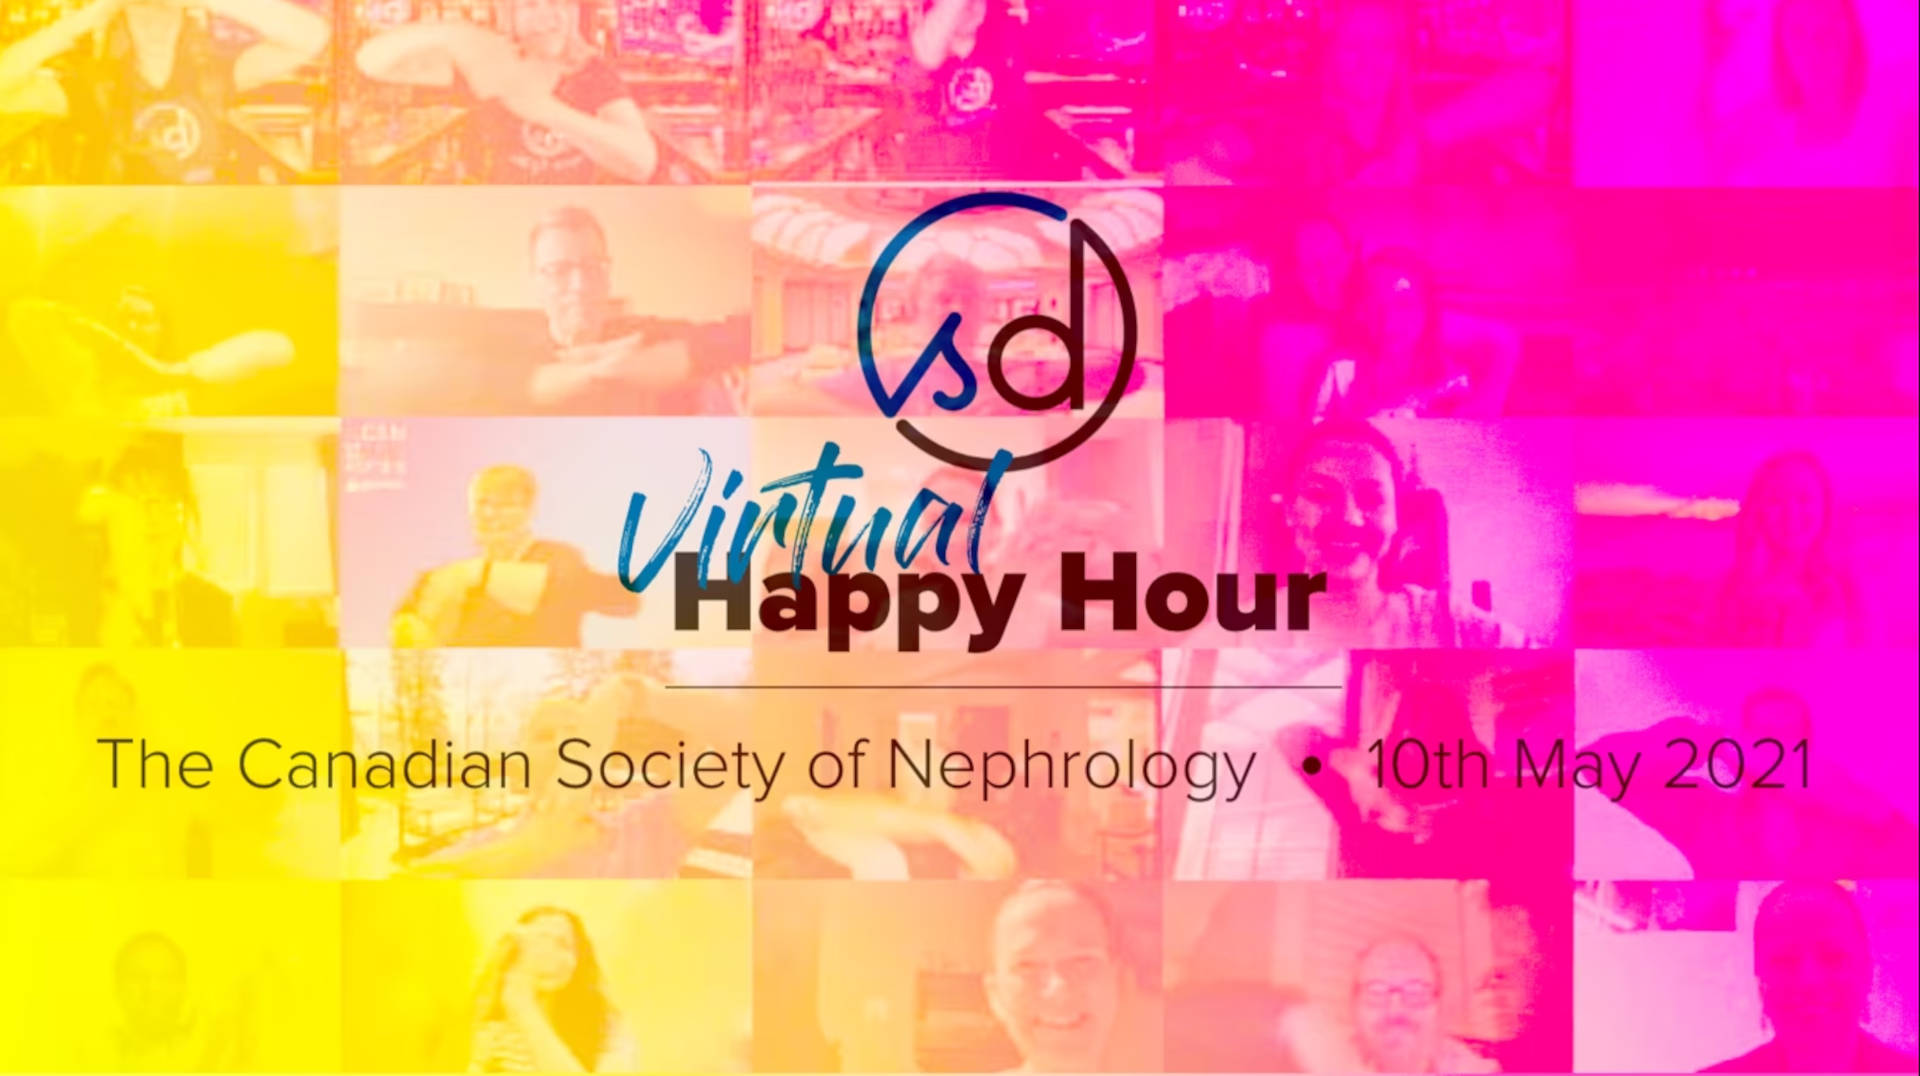 Canadian Society of Nephrology: Virtual Happy Hour with SongDivision